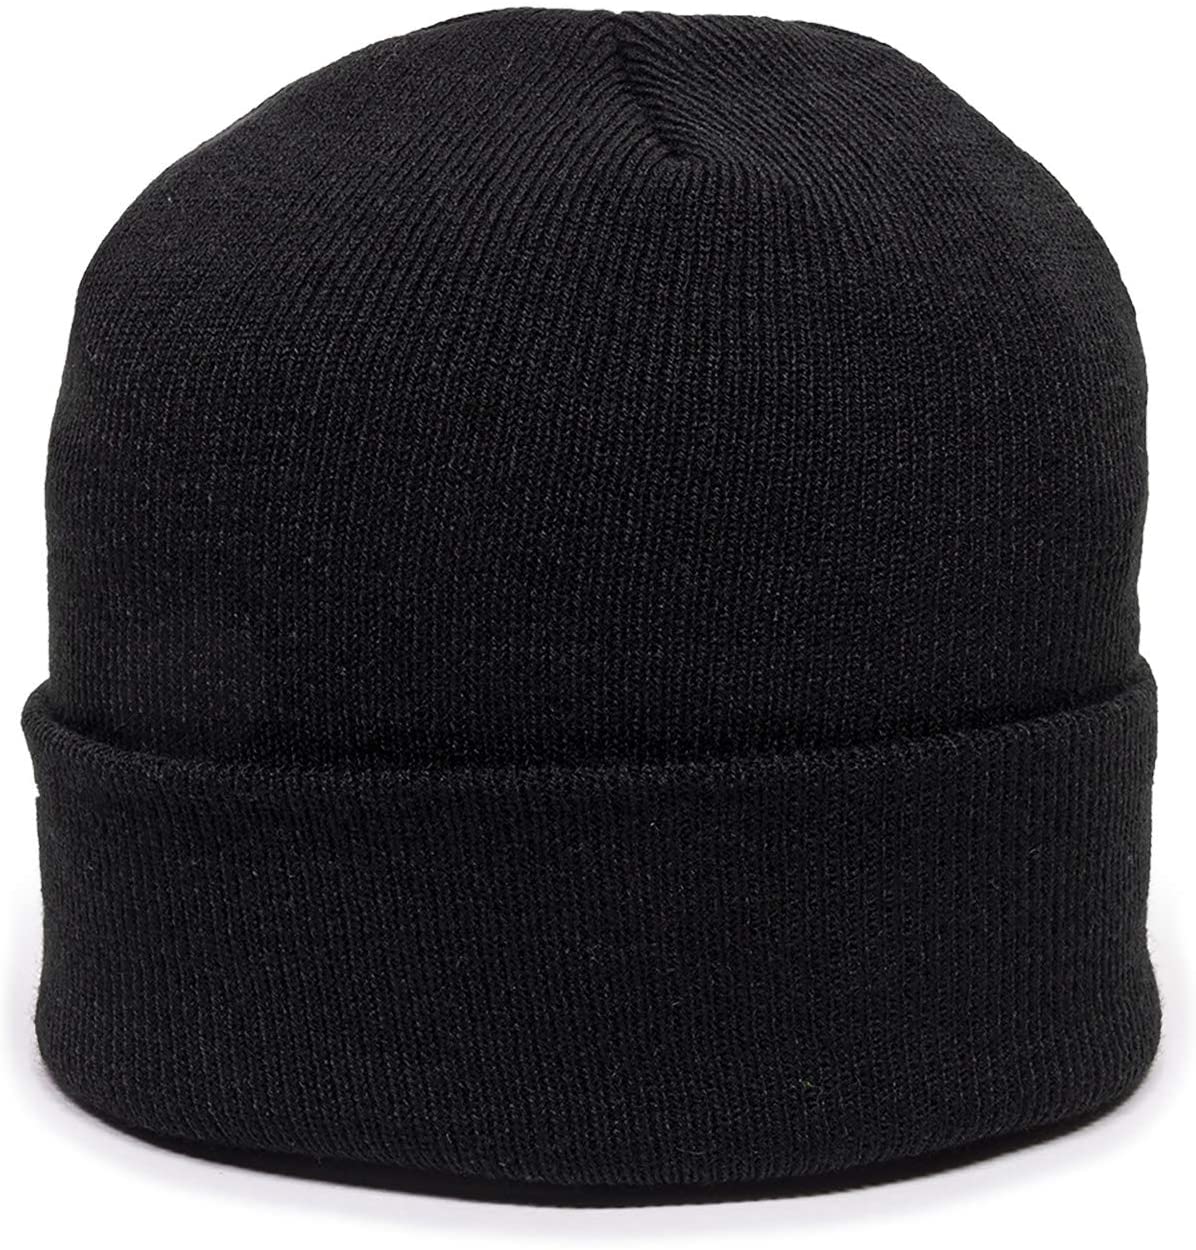 Outdoor Cap Knit with Cuff  (Black) - KN-400 Black